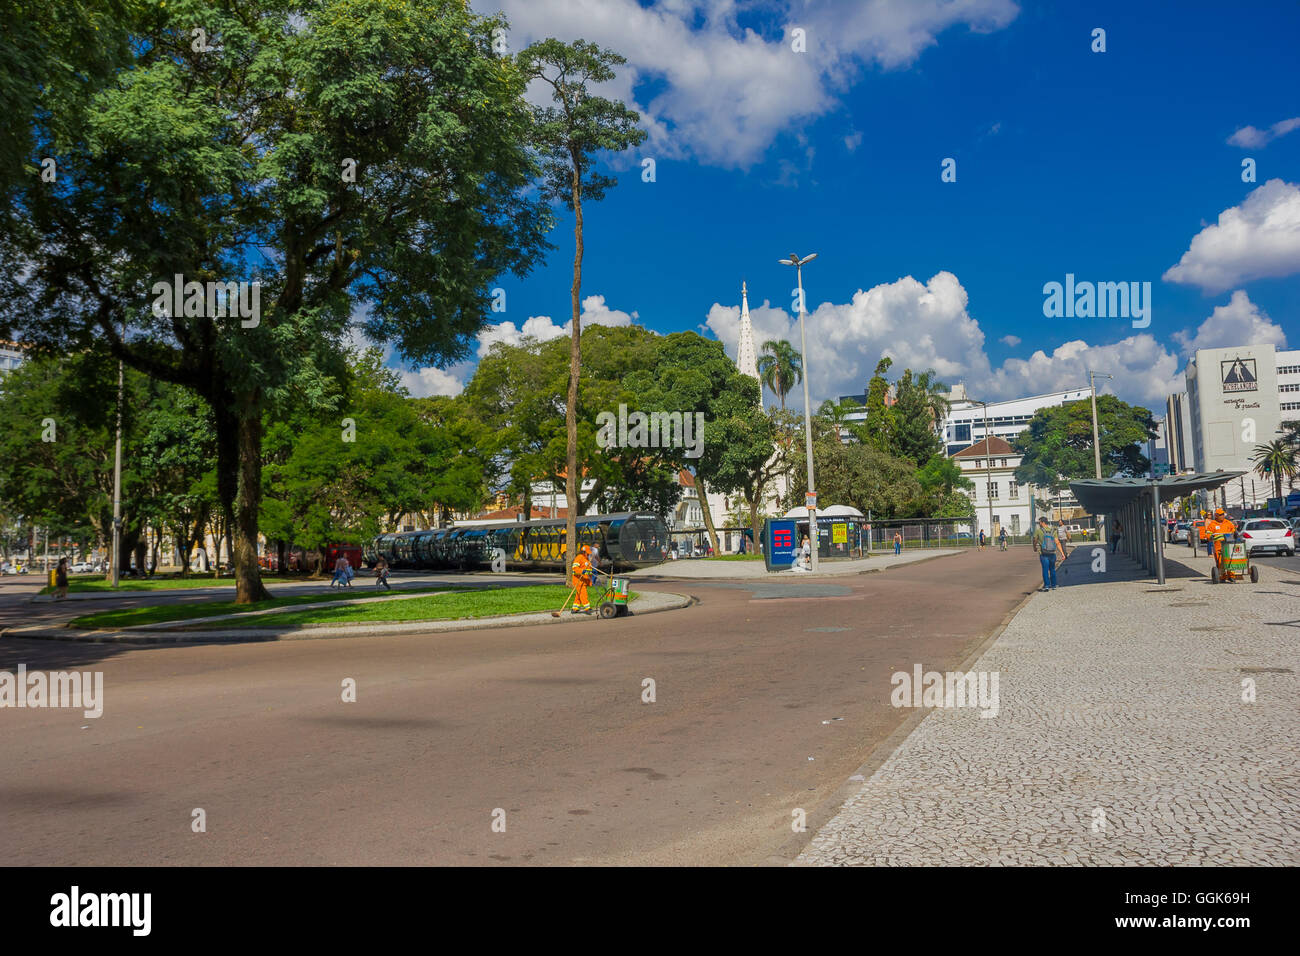 CURITIBA ,BRAZIL - MAY 12, 2016: pedestrians walking arround the bus station surrounded by big trees Stock Photo